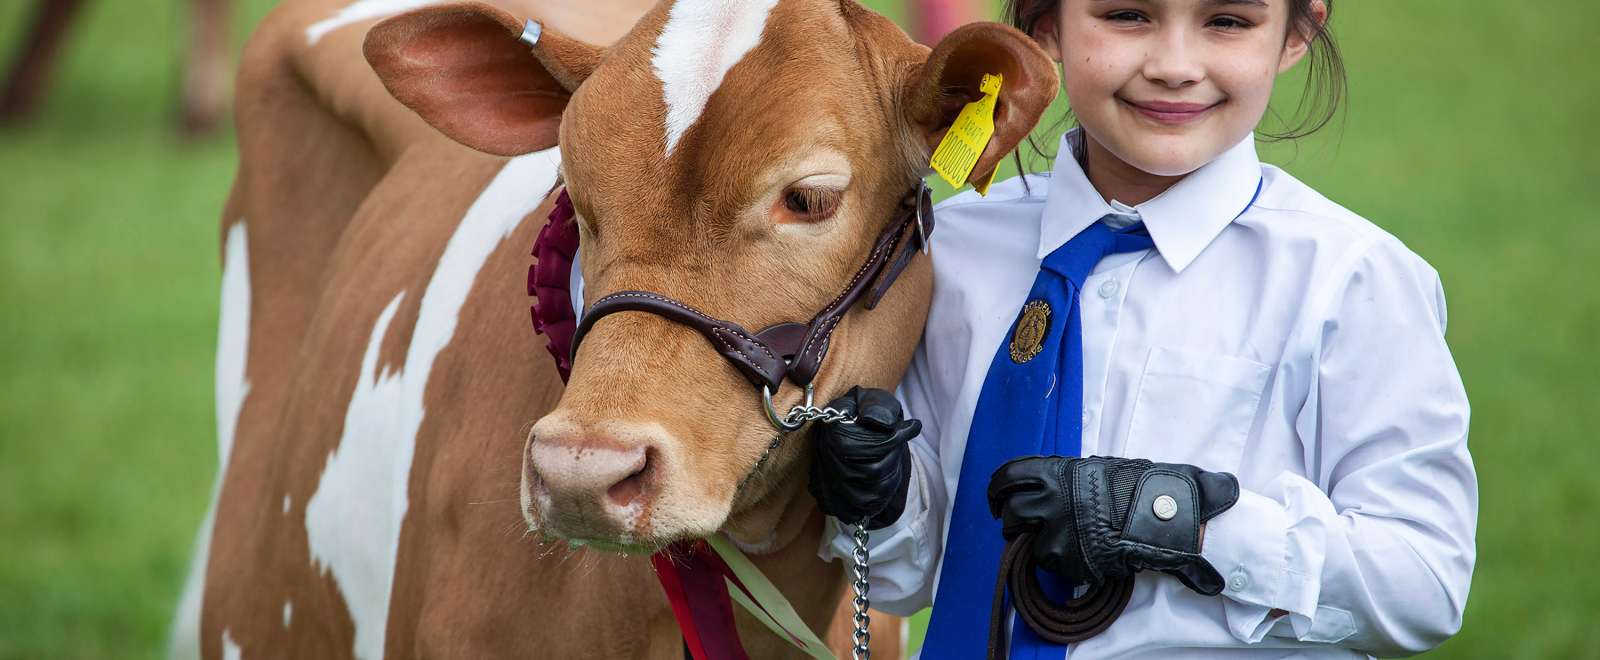 Girl with Cow at Devon County Show Parade